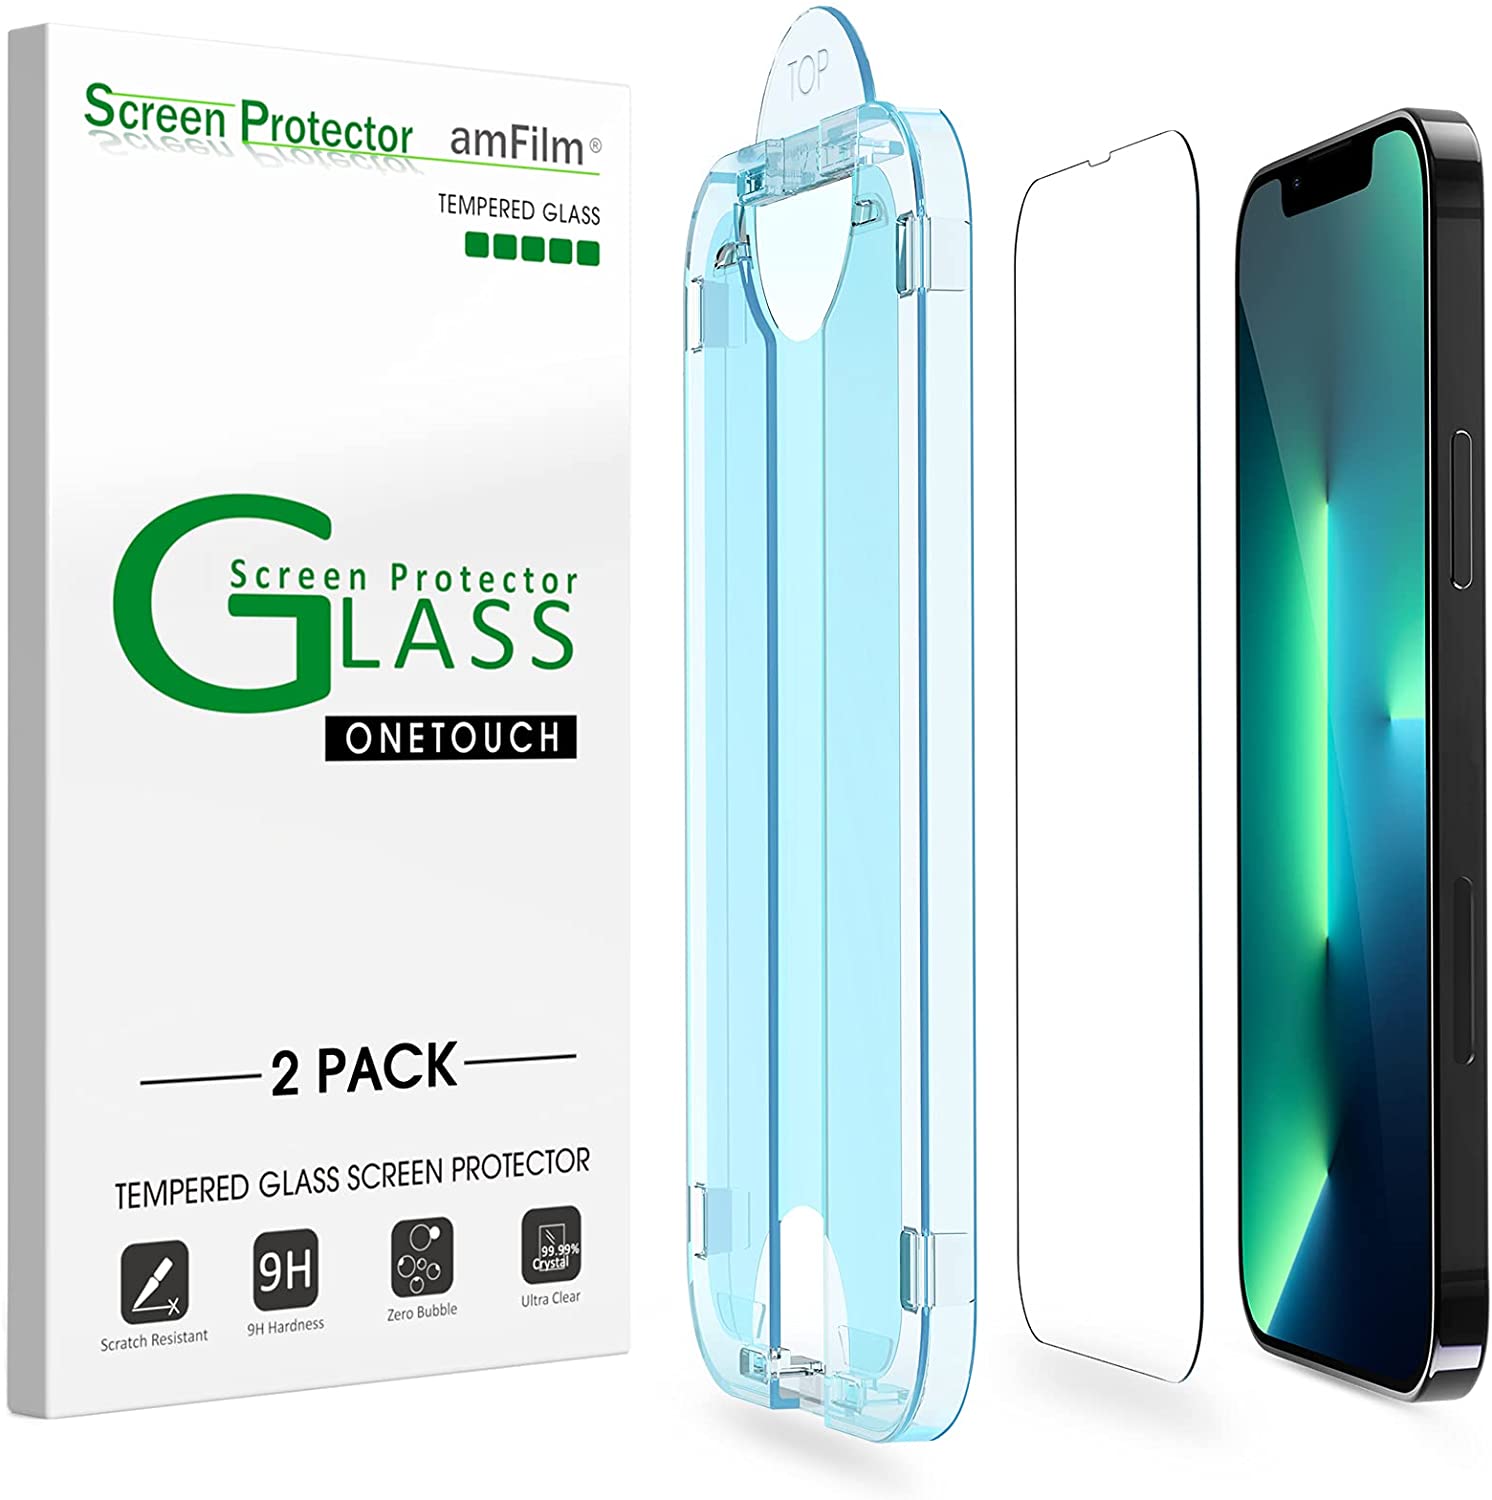 Tempered Glass Screen Protector for iPhone 11 Pro Max 3 Pack CUSKING 9H Hardness HD Screen Protector Film for iPhone 11 Pro Max Shock Absorbent Ultra Thin 